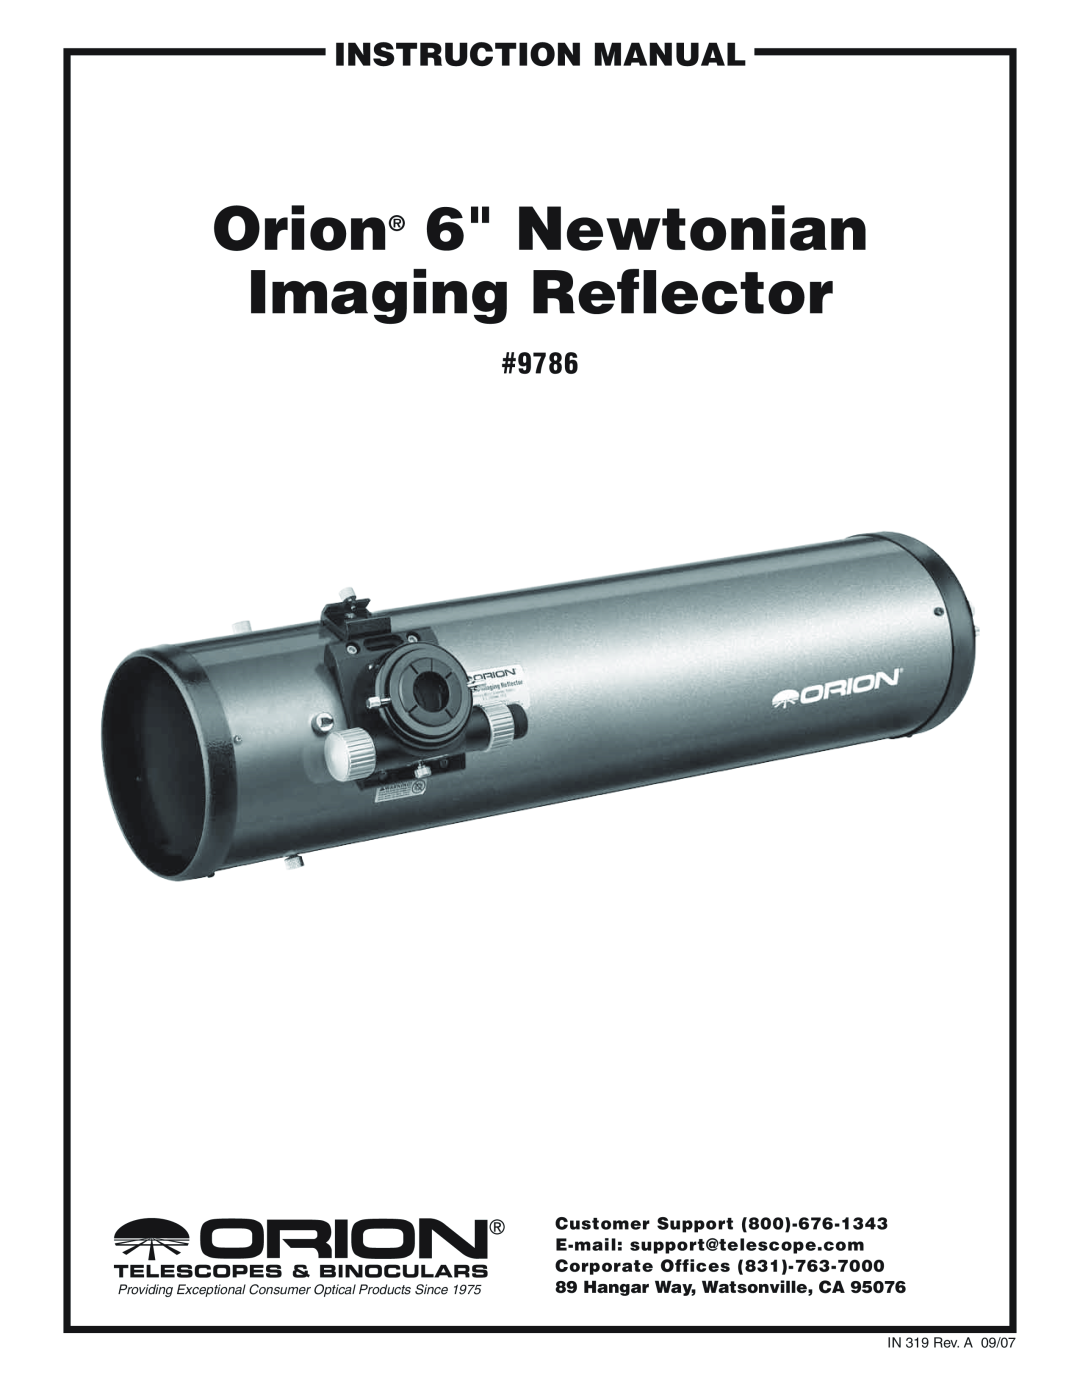 Orion instruction manual #9786, Customer Support 800‑676-1343, E-mail support@telescope.com 